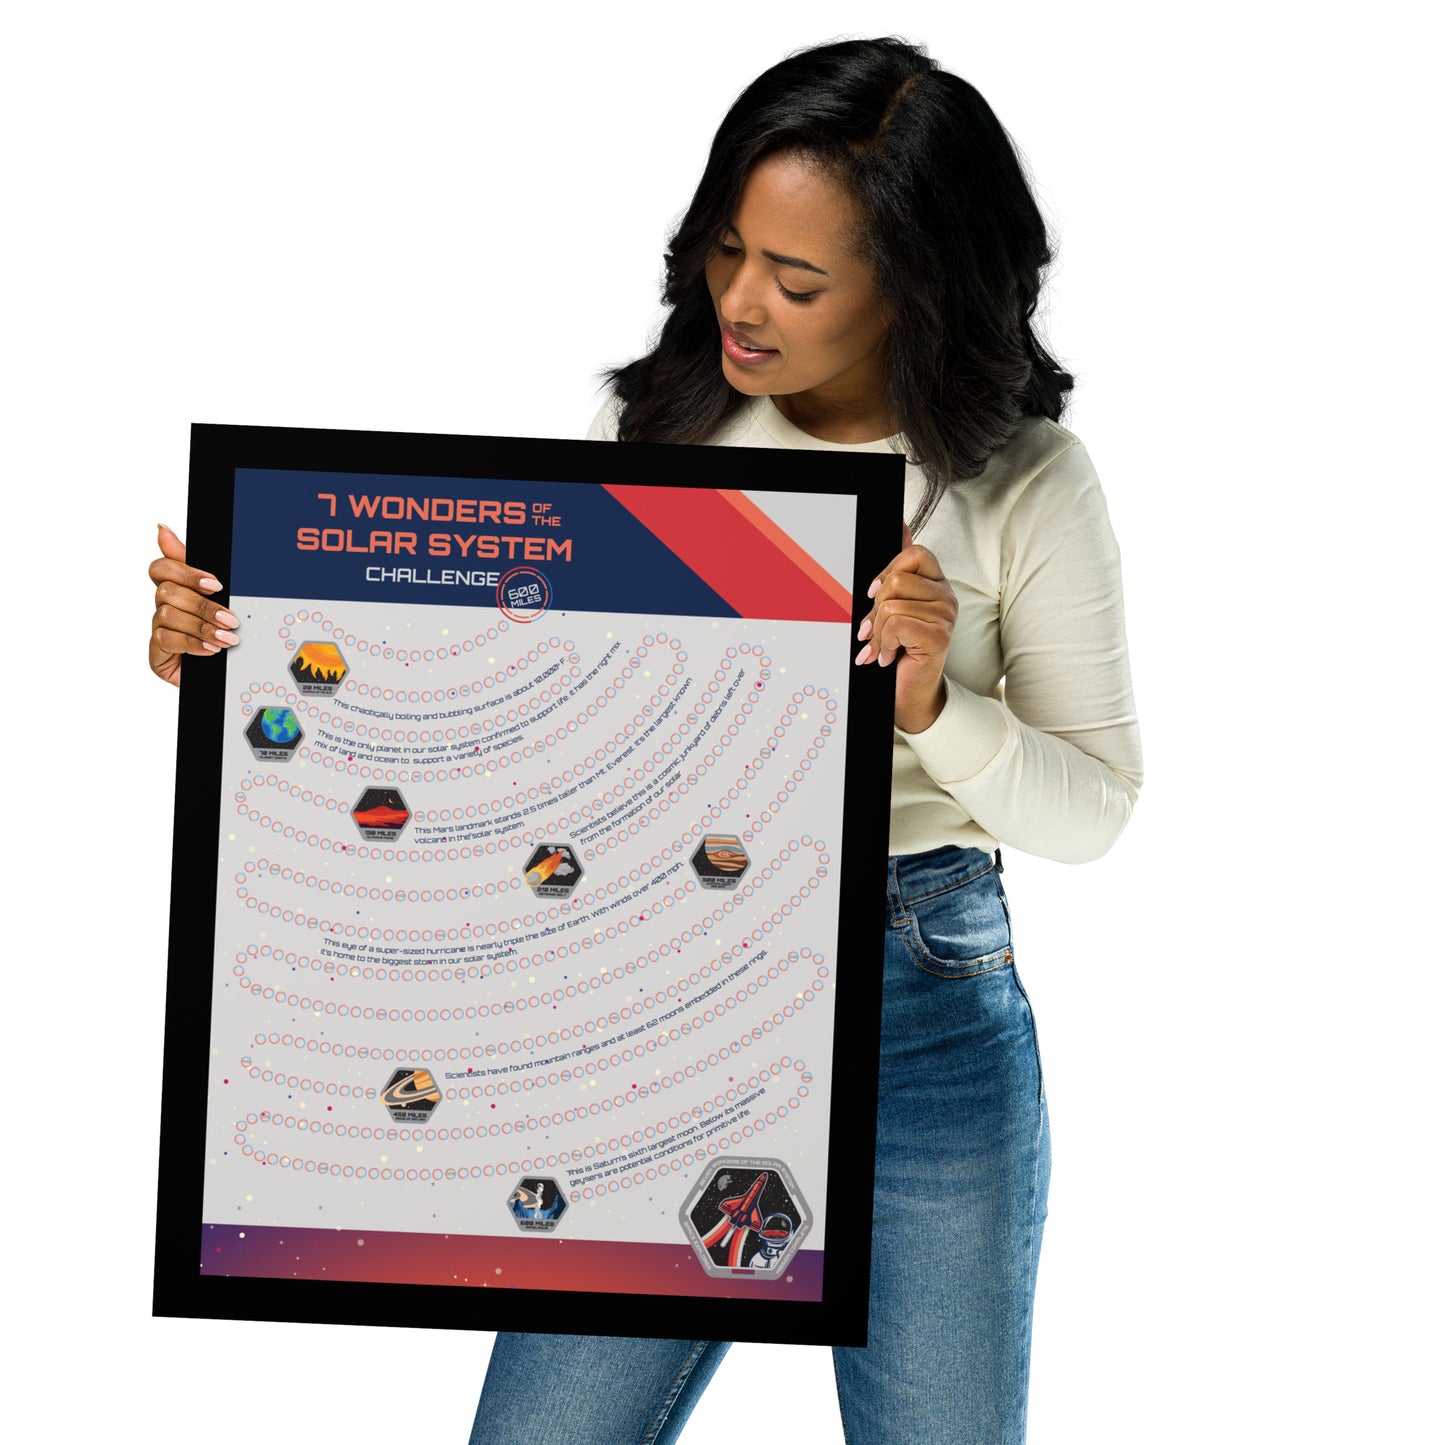 7 Wonders of the Solar System 600 Mile Challenge Tracker Poster